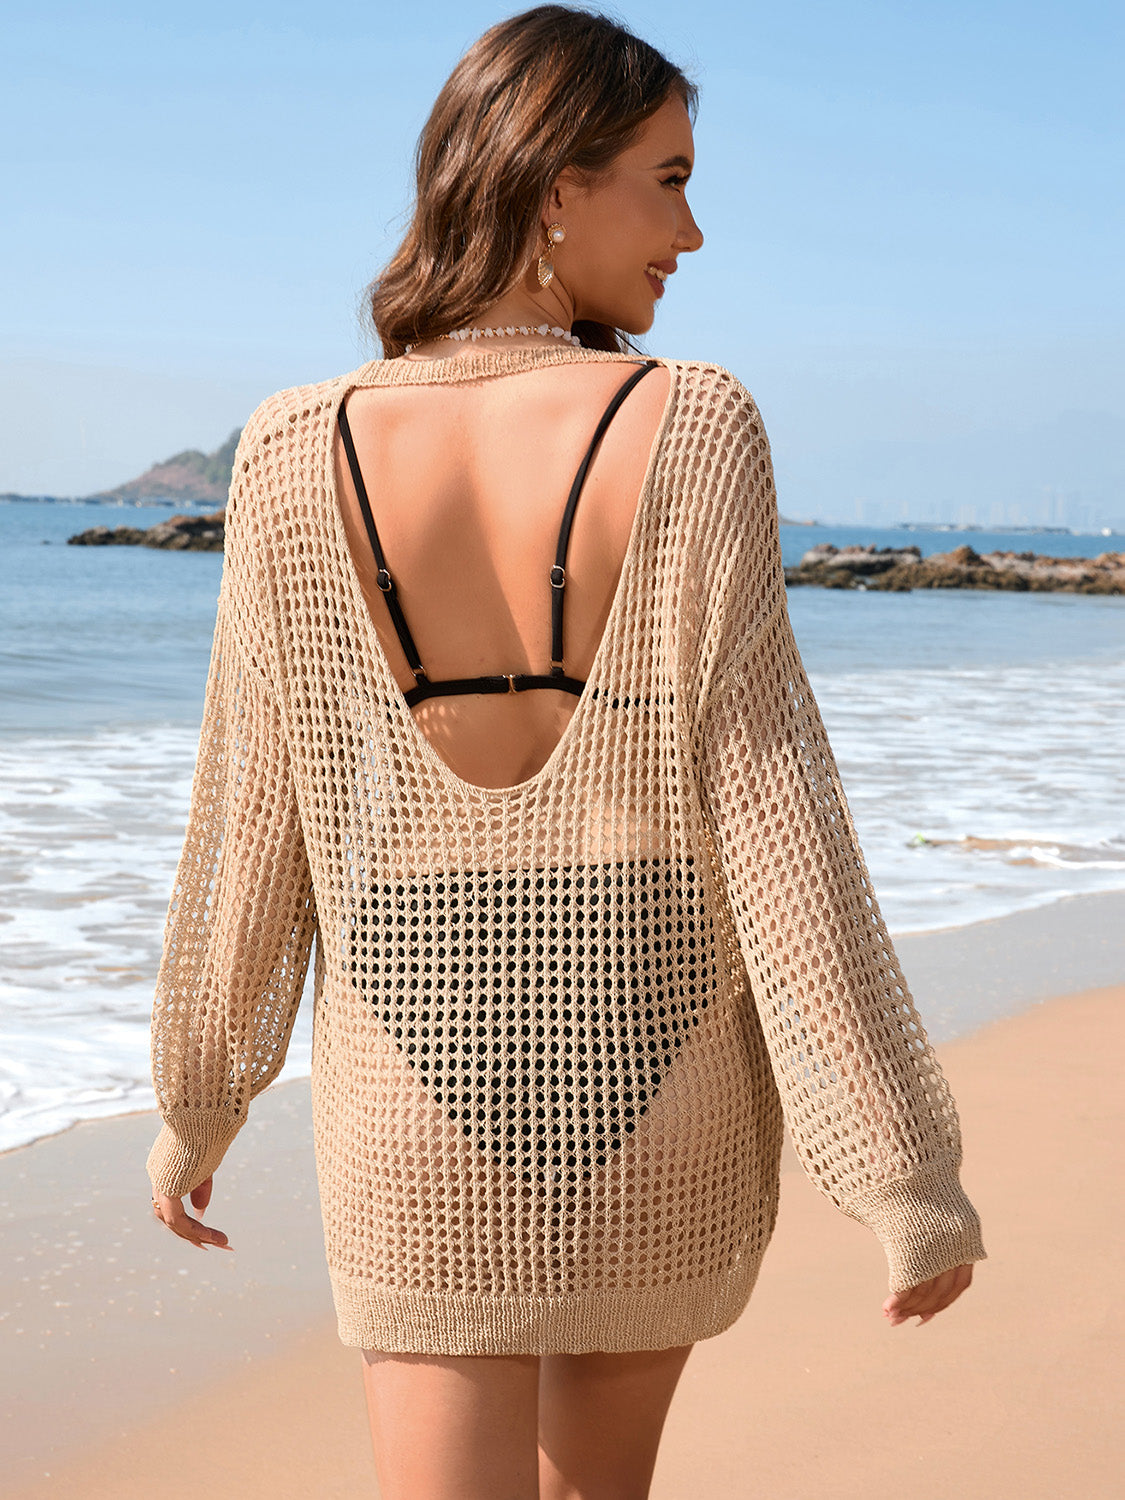 FZ Women's Backless Boat Neck Long Sleeve Swimsuit Cover Up